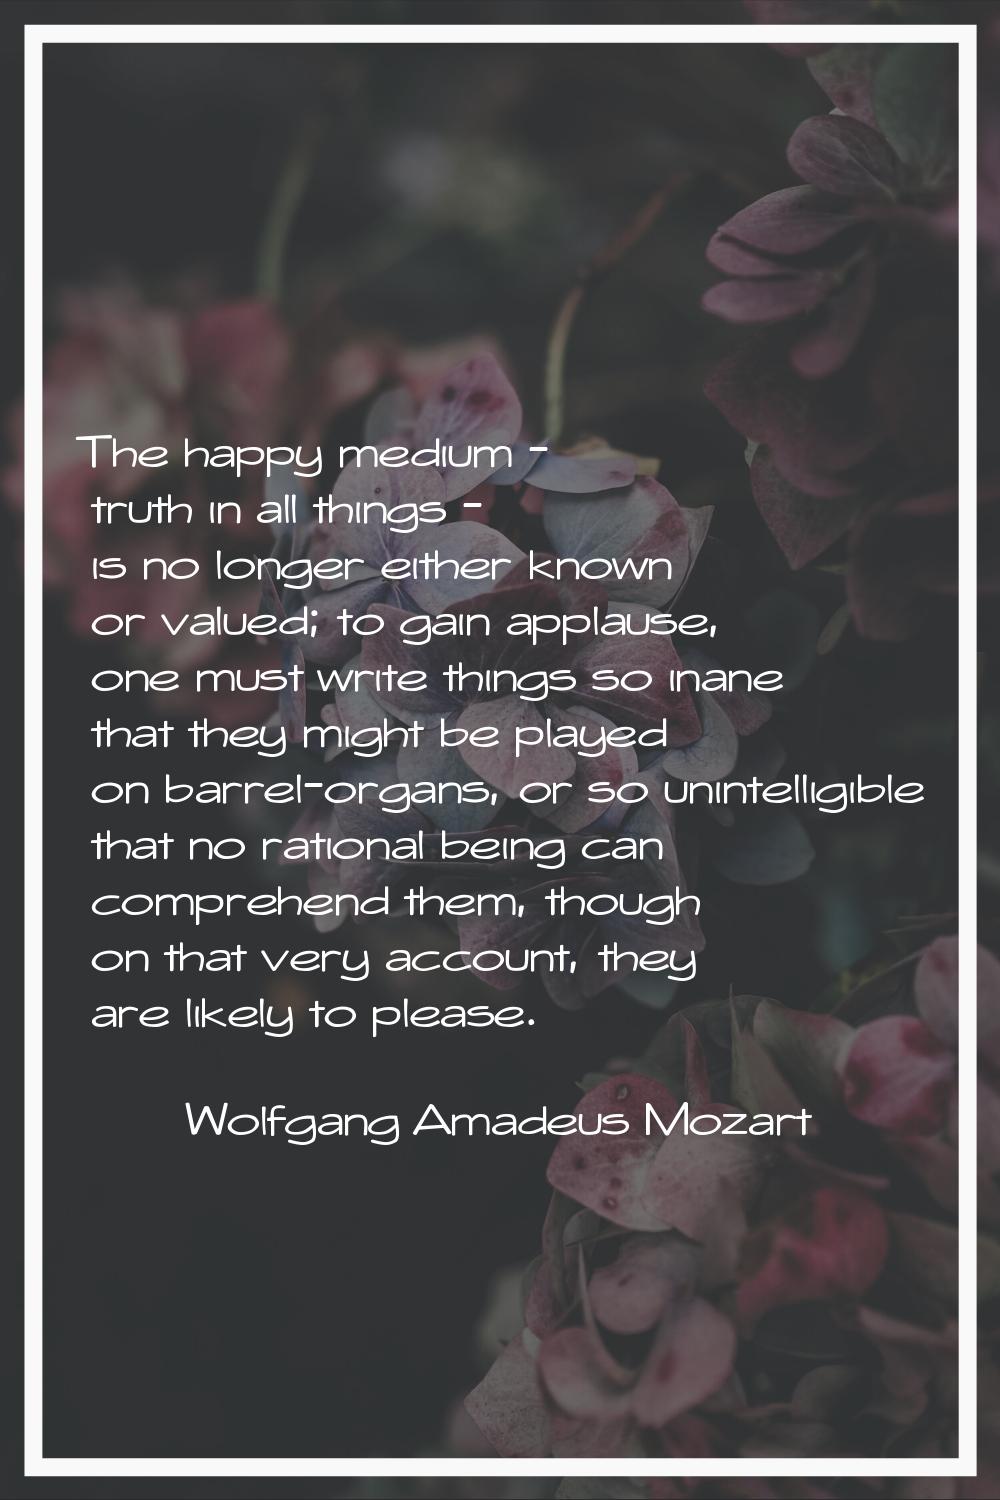 The happy medium - truth in all things - is no longer either known or valued; to gain applause, one